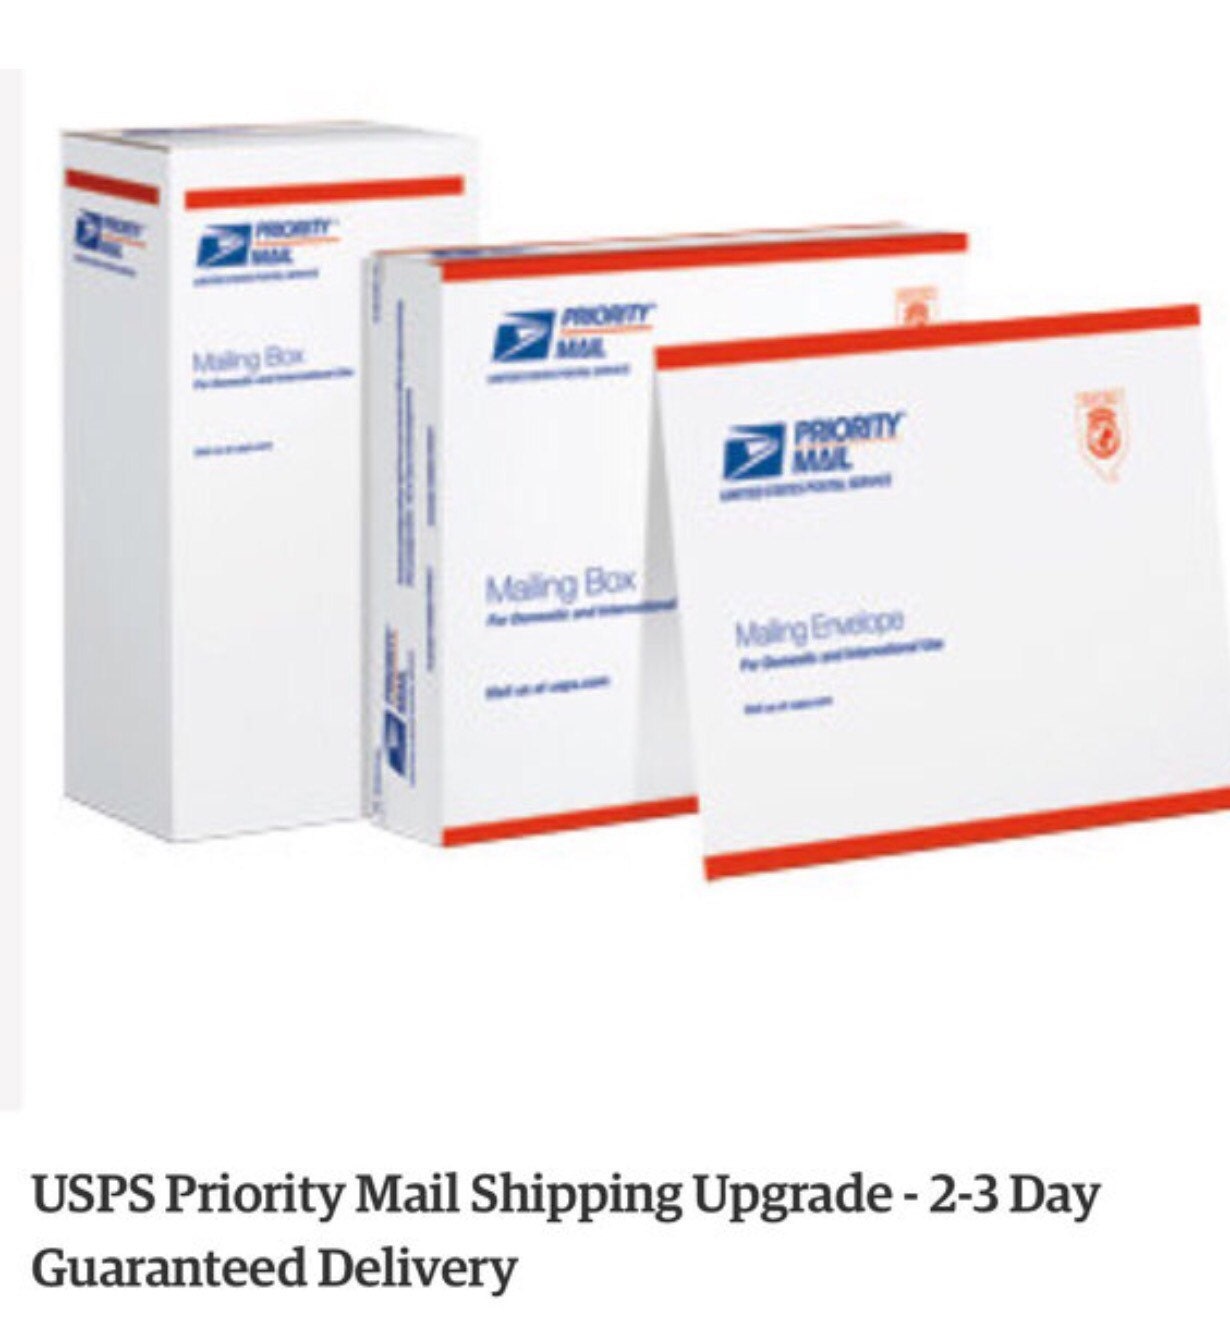 Usps Priority Shipping 2 3 Day Upgrade By Littleheartsco On Etsy 5718